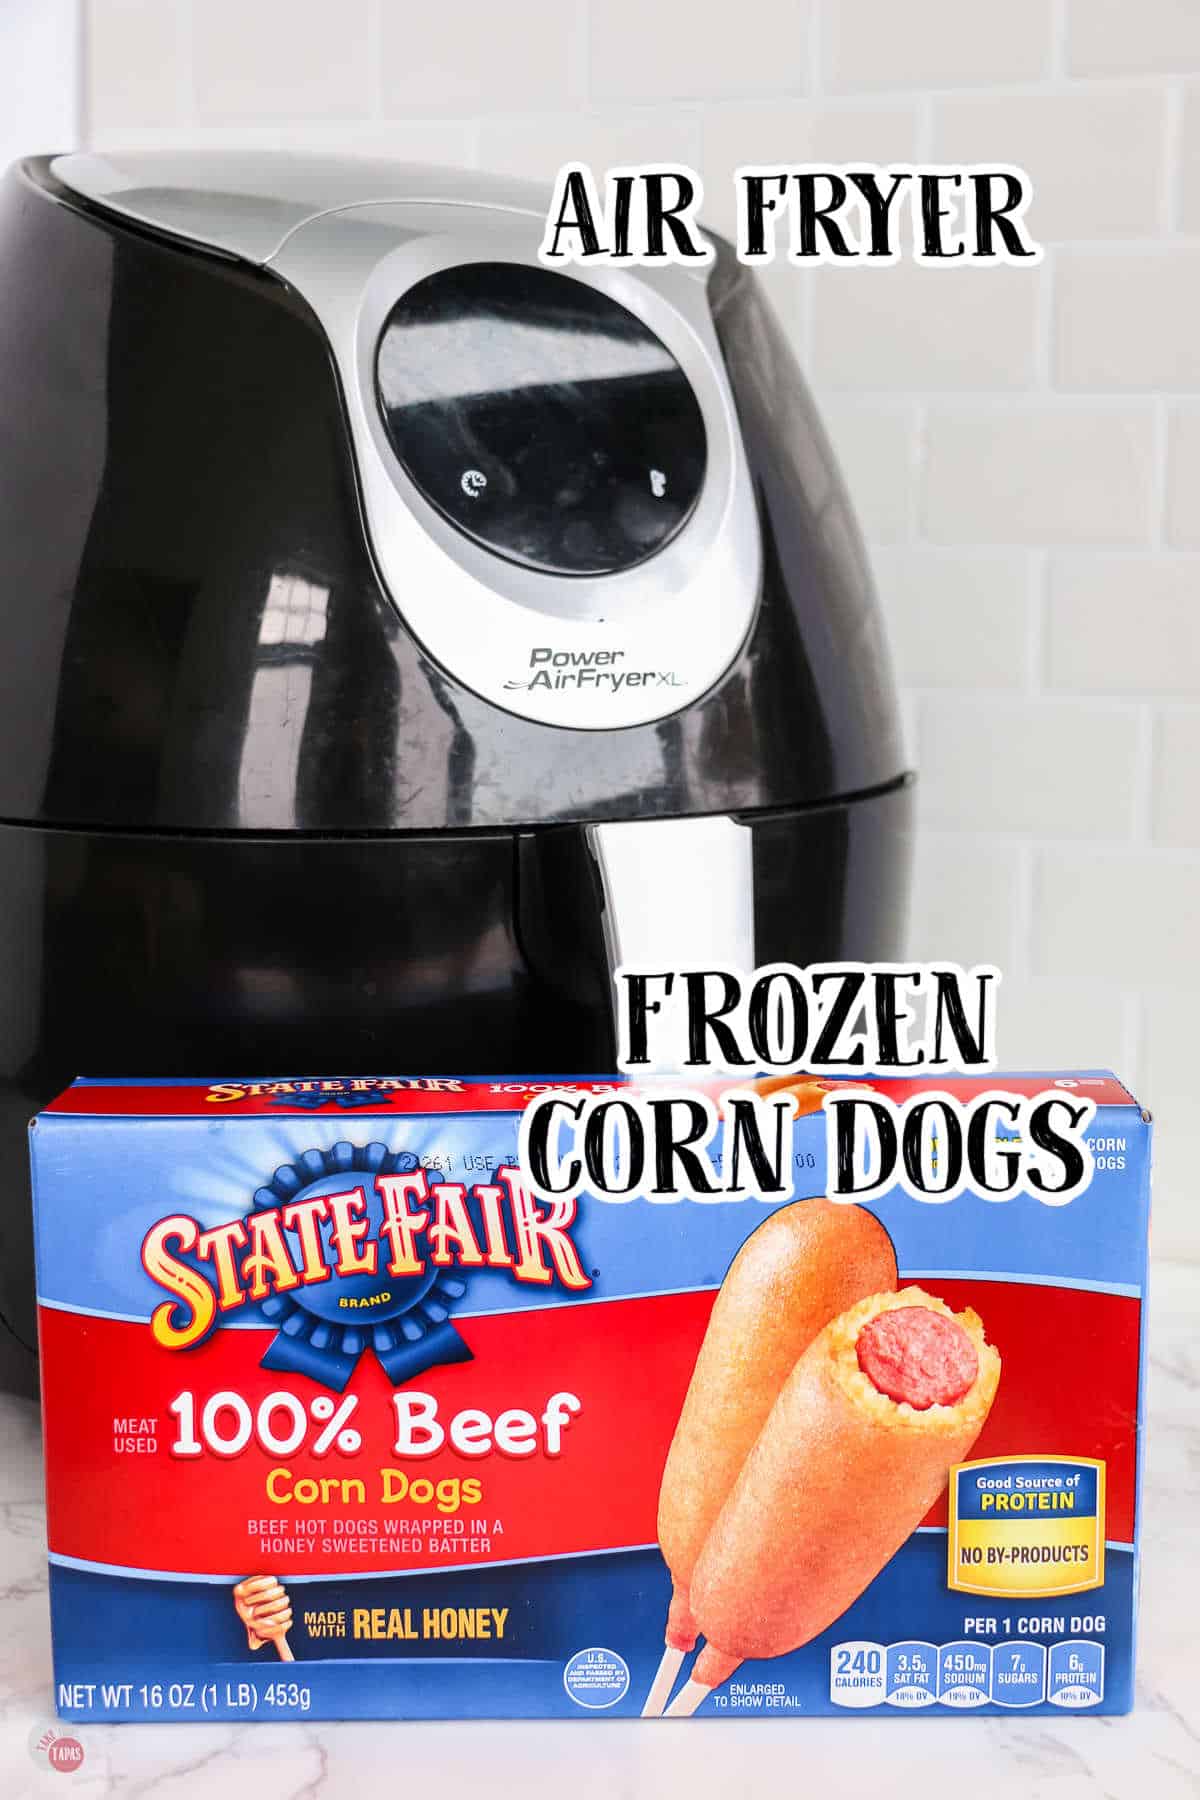 Air Fryer and a pack of State Fair frozen corn dogs. 